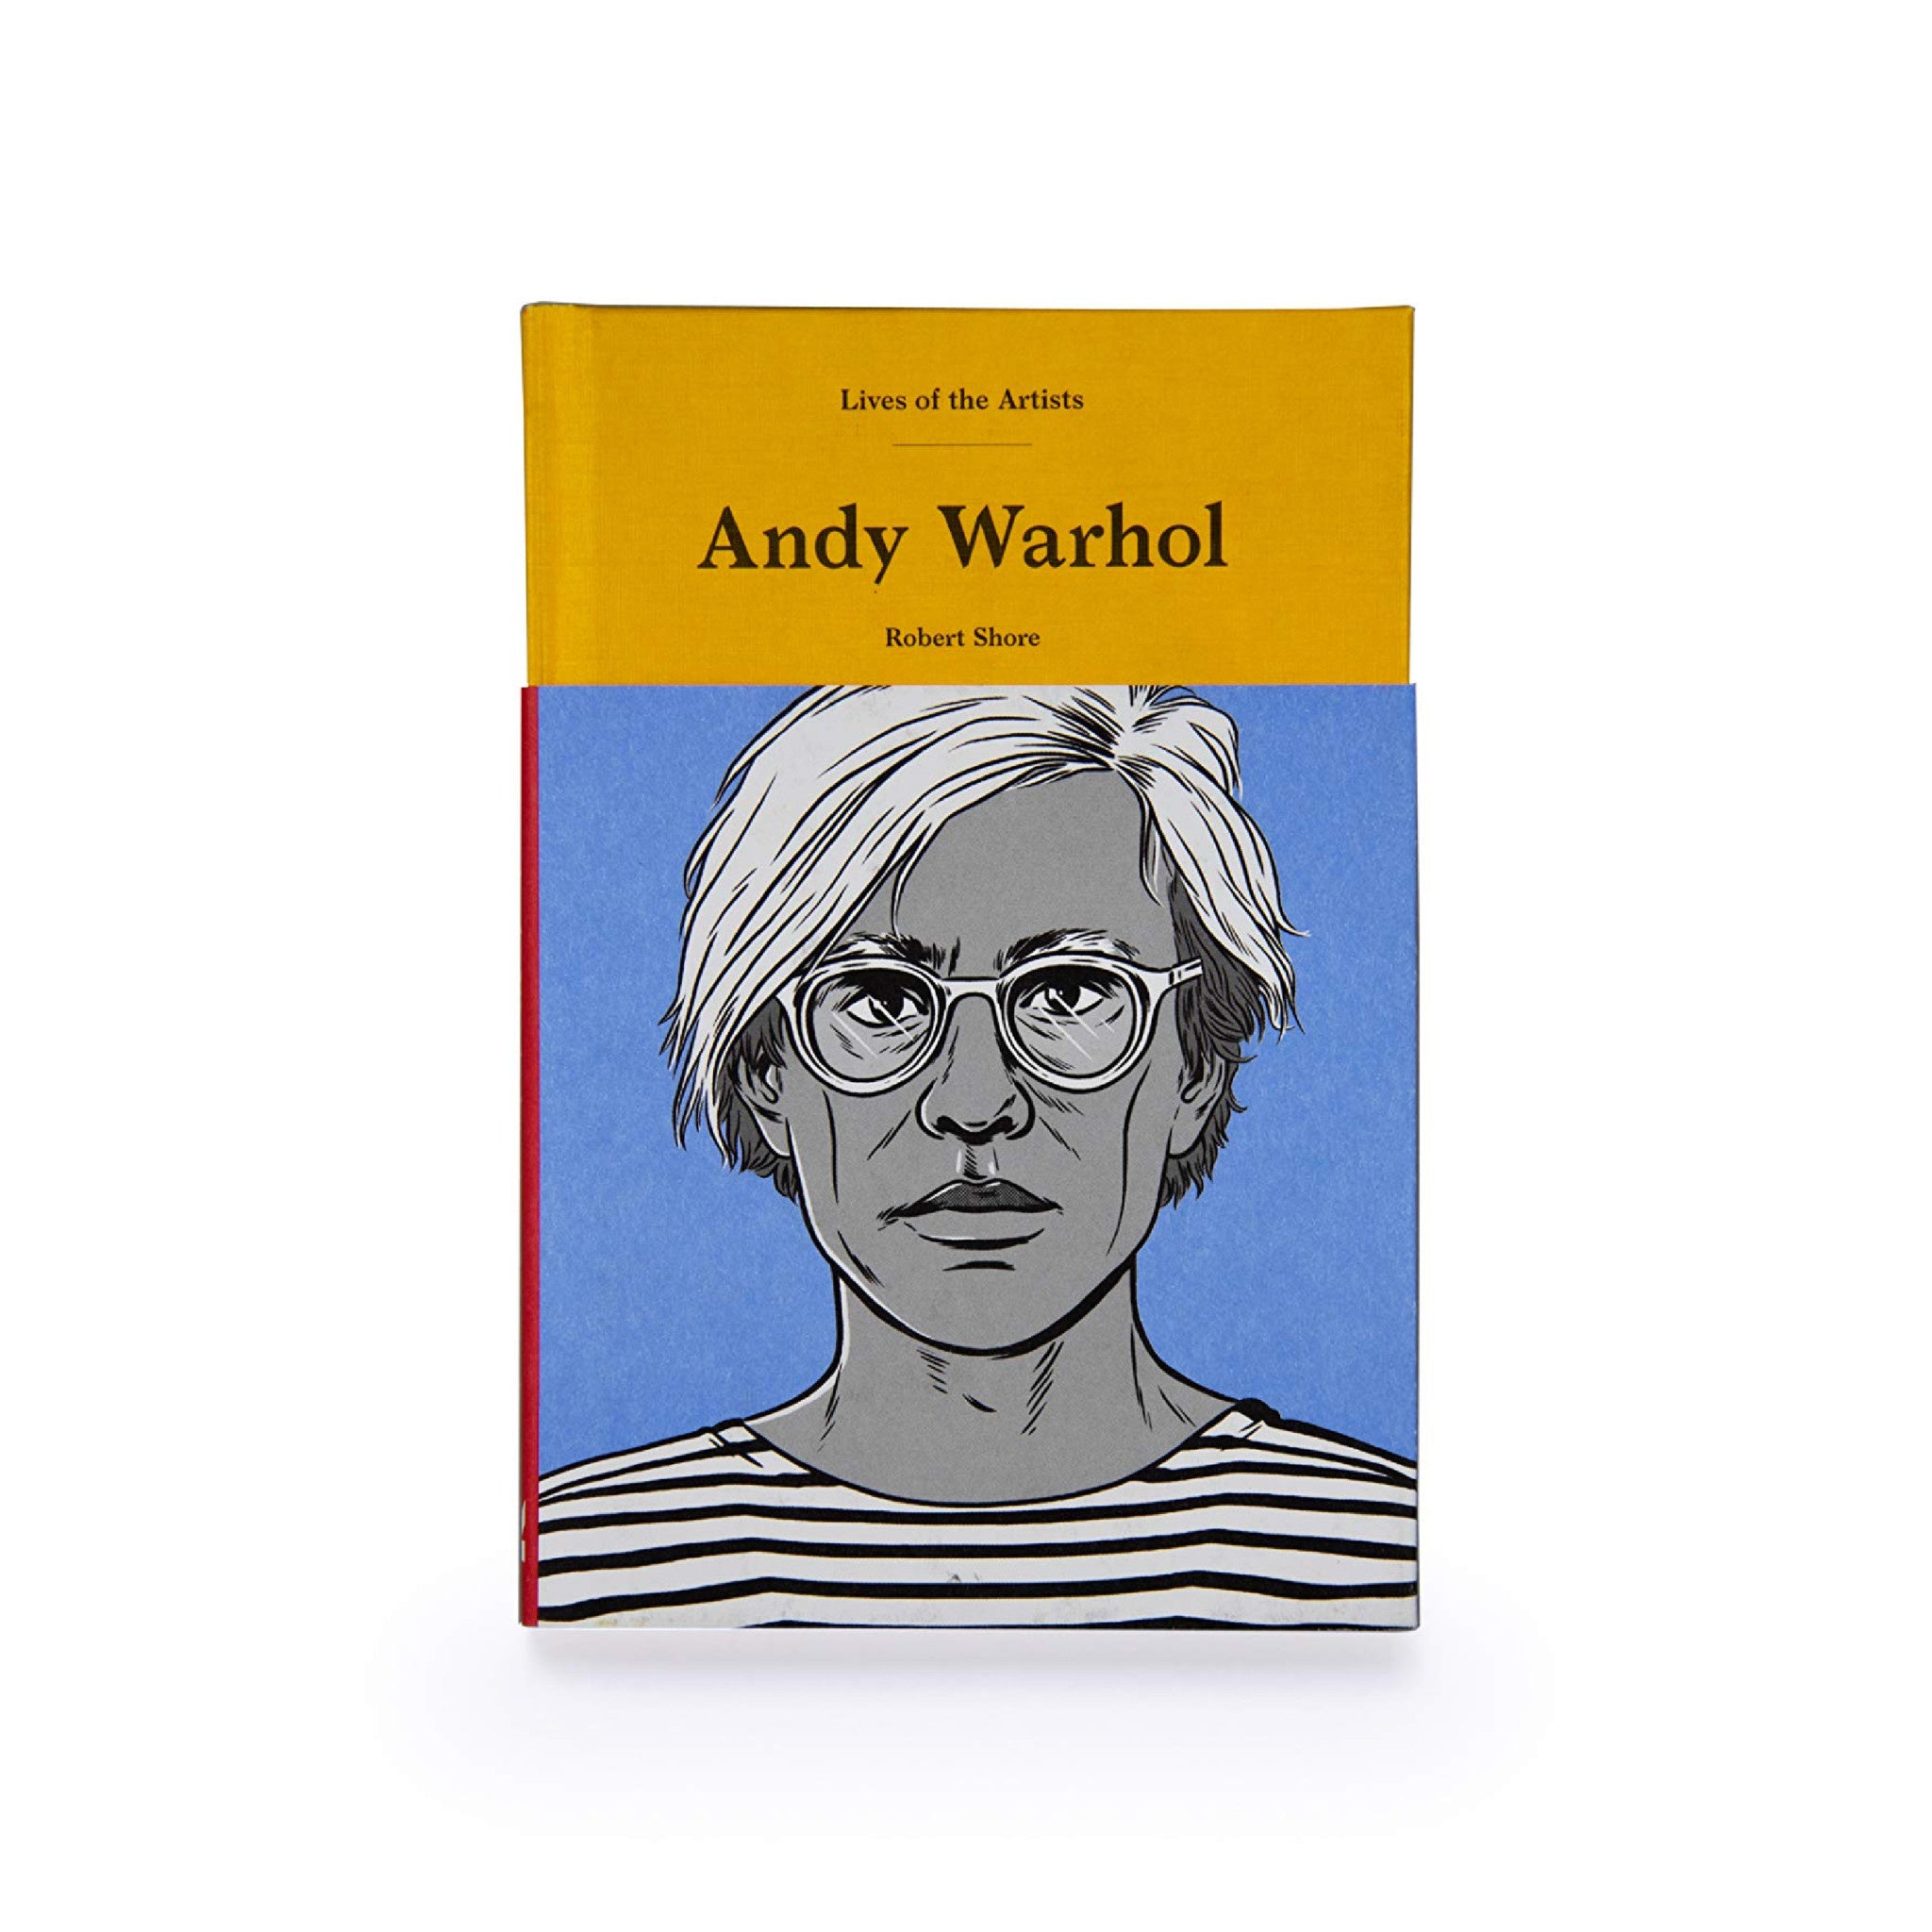 Andy Warhol (Lives of the Artists) - Wynwood Walls Shop